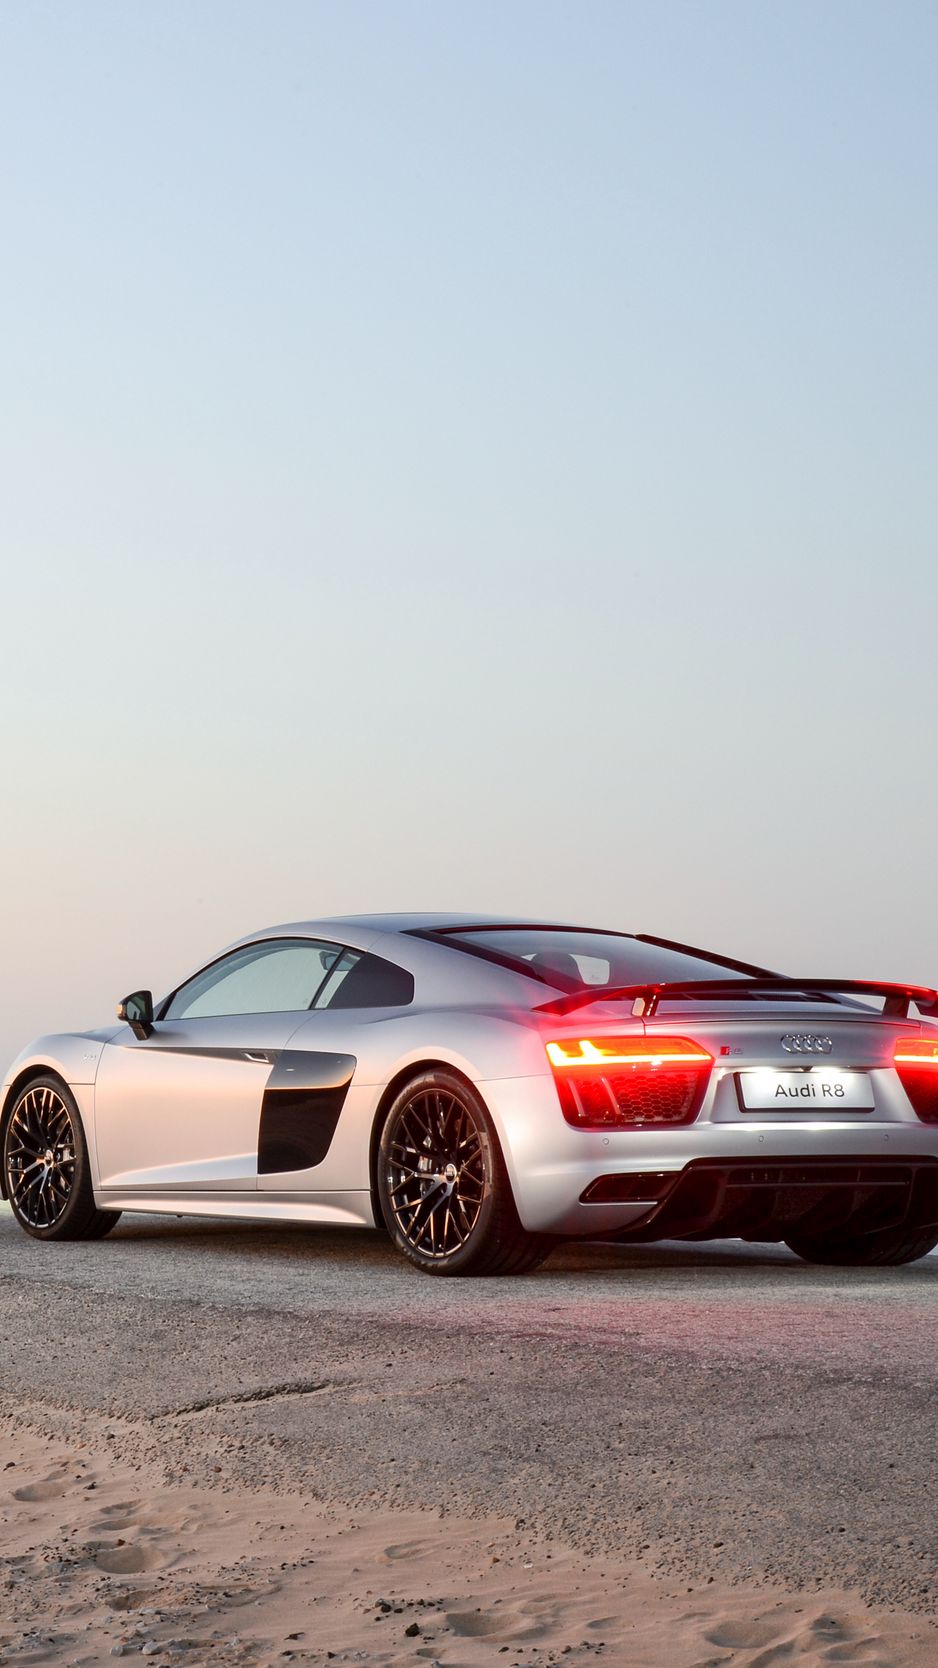 Download wallpaper 938x1668 audi, r8, rear view, road iphone 8/7/6s/6 for  parallax hd background